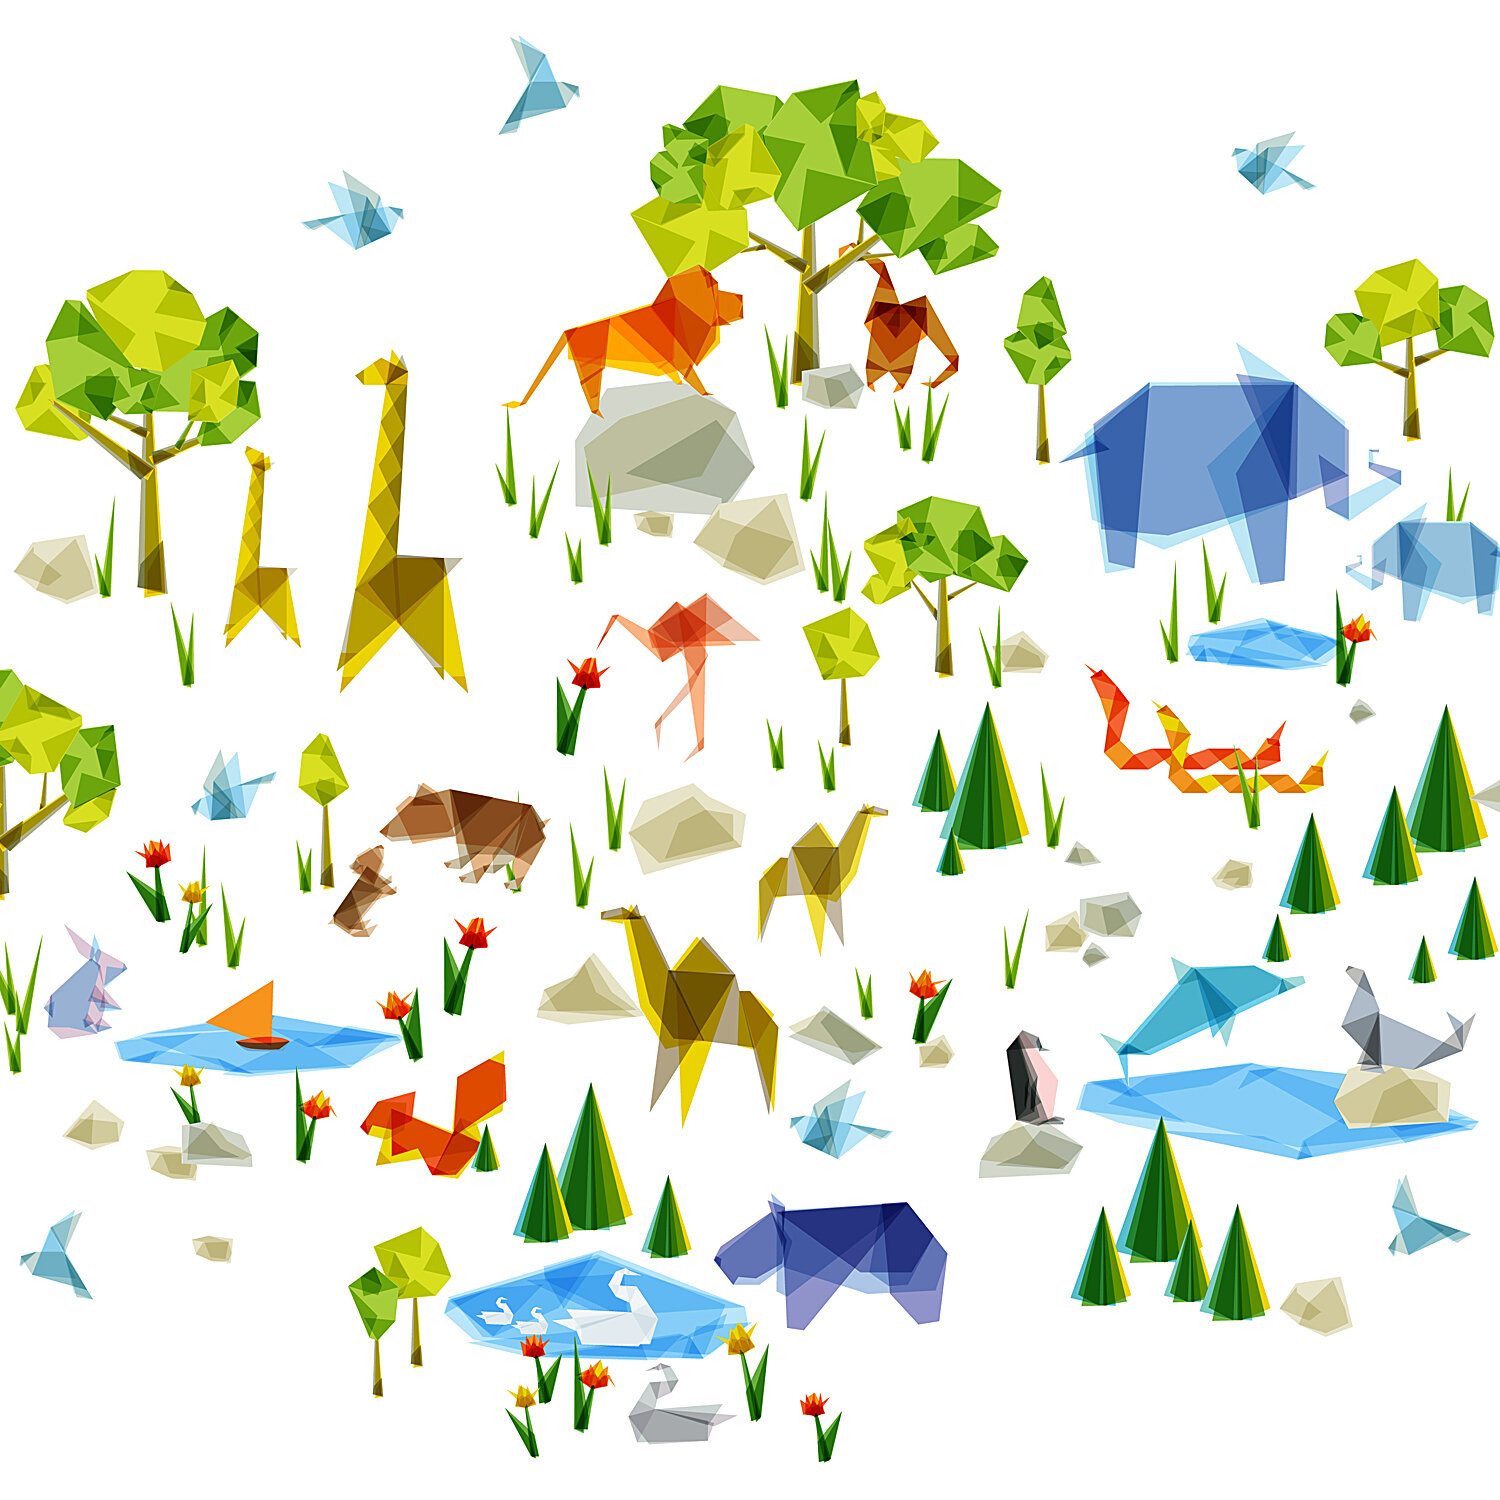  Origami Zoo - Wall Decals 